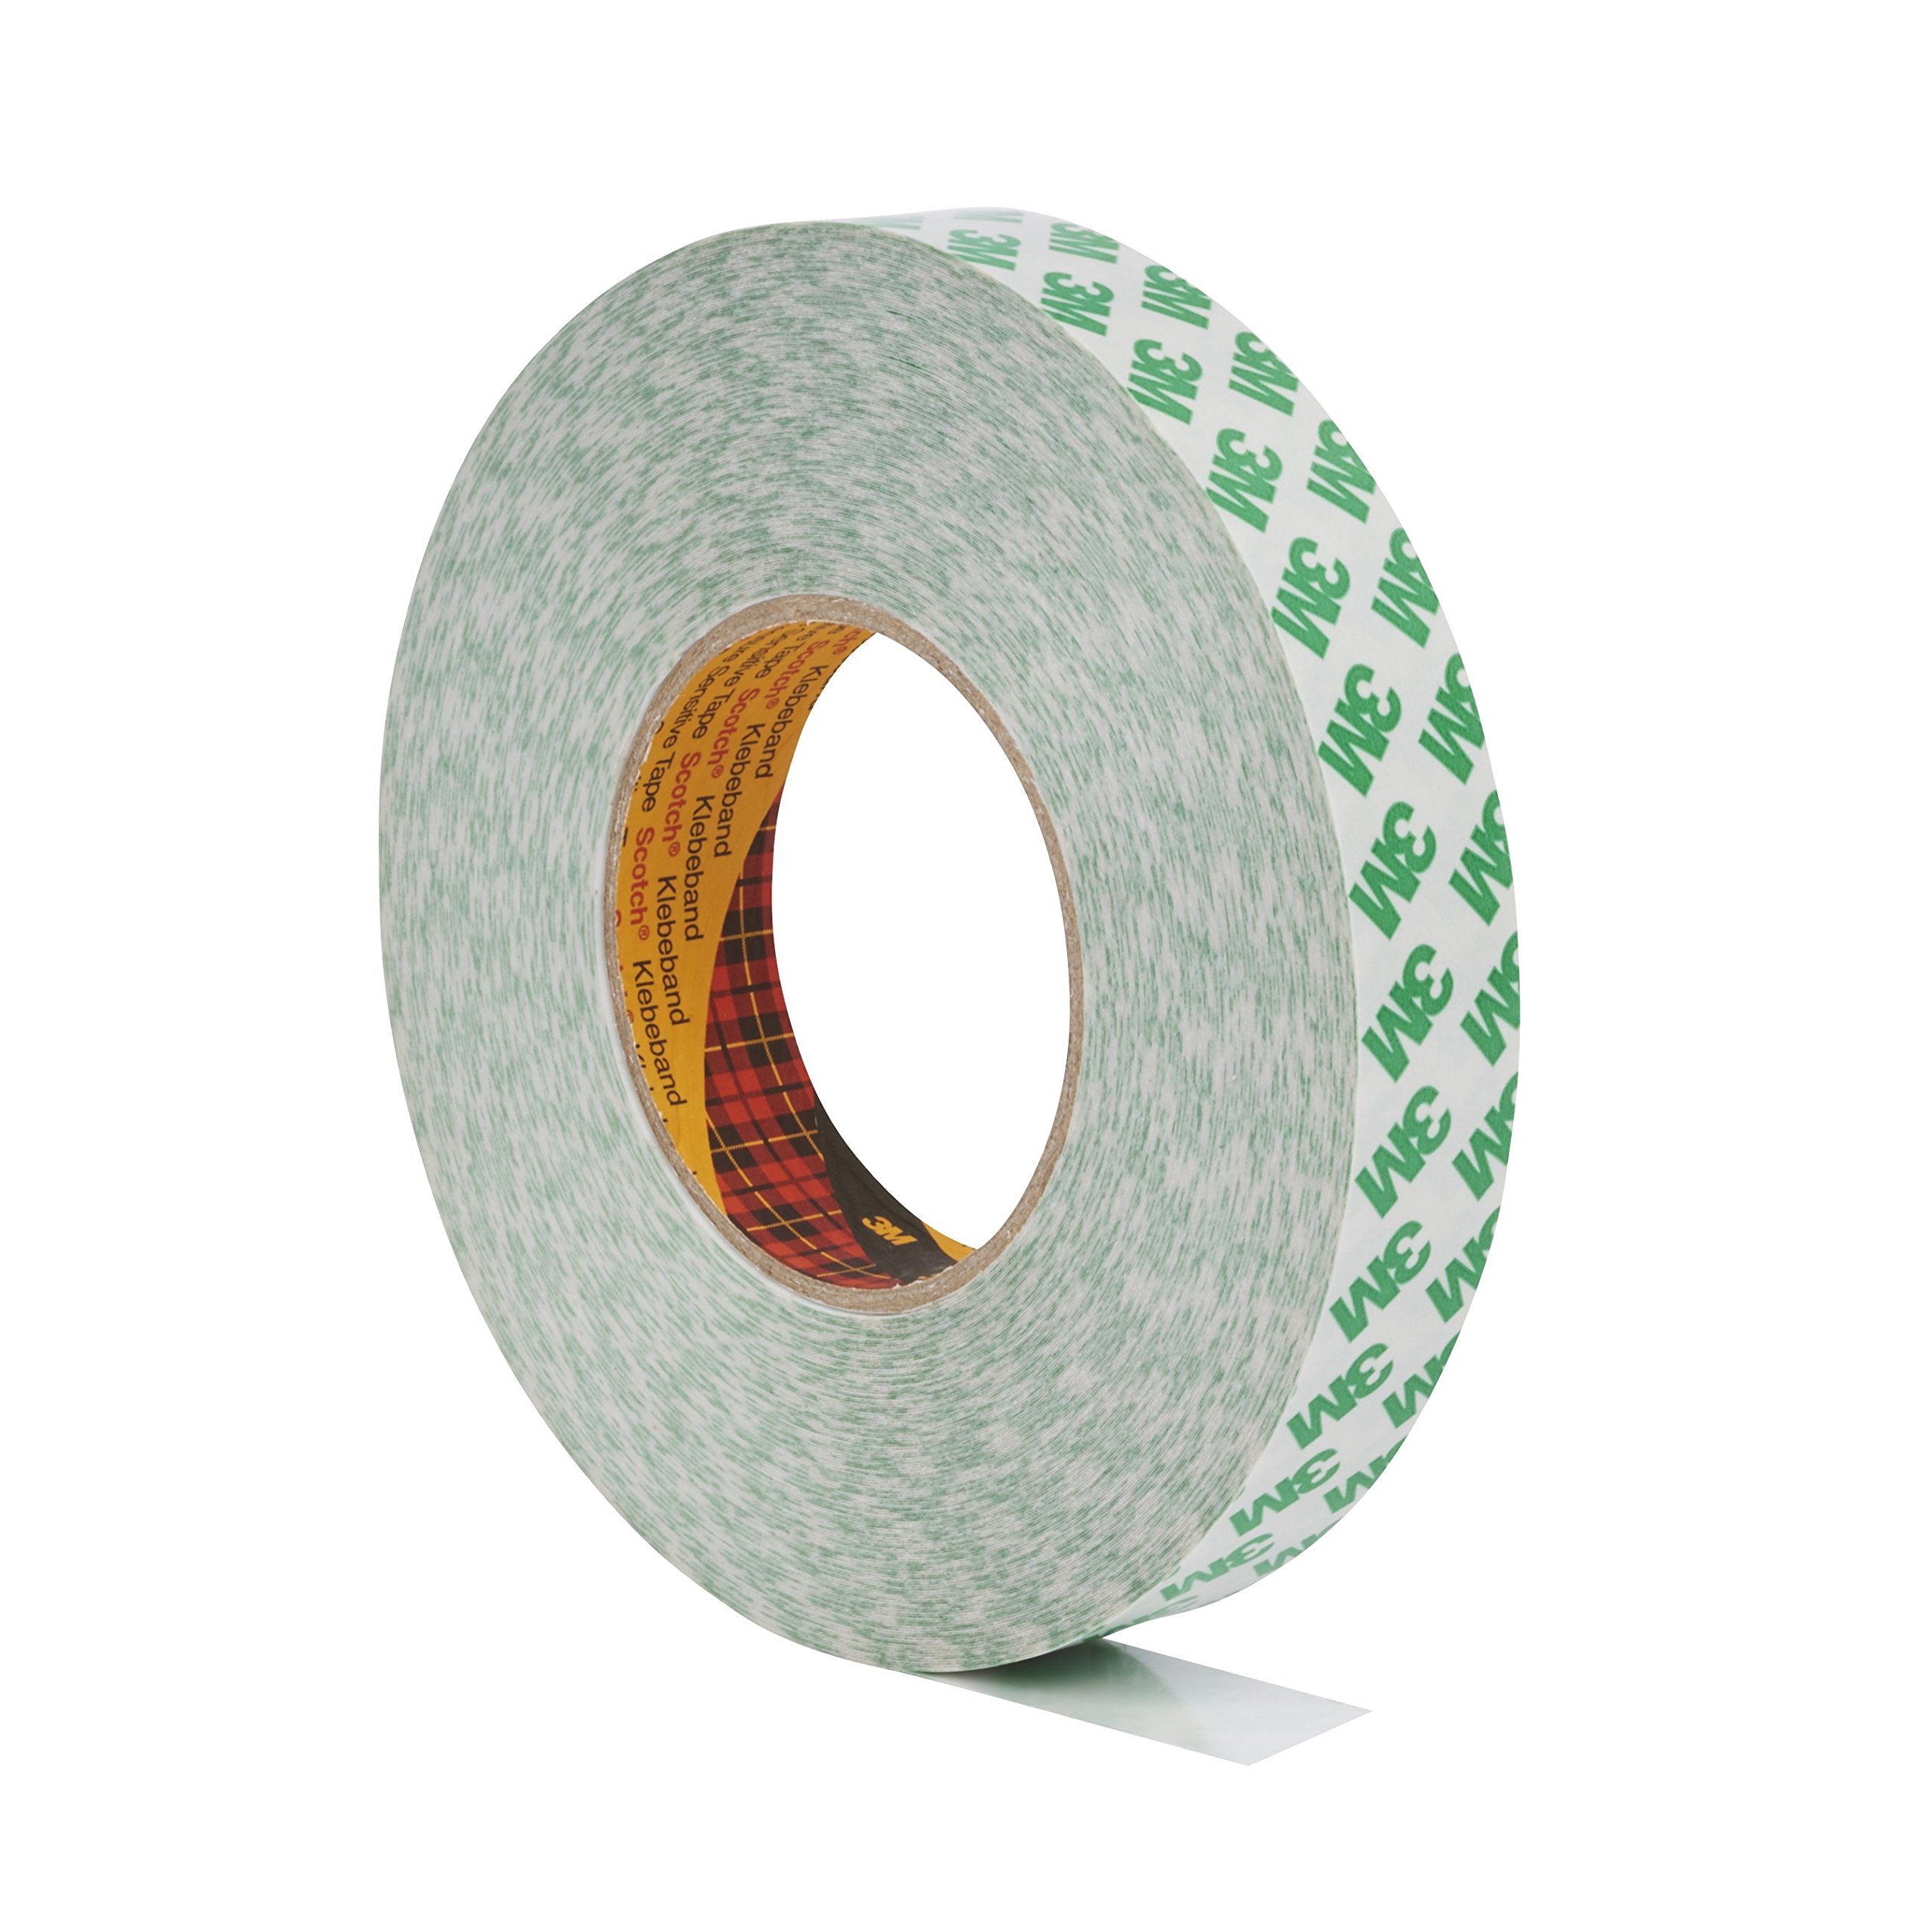 3M™ 9087 Double Coated Tape 25mm x 50m